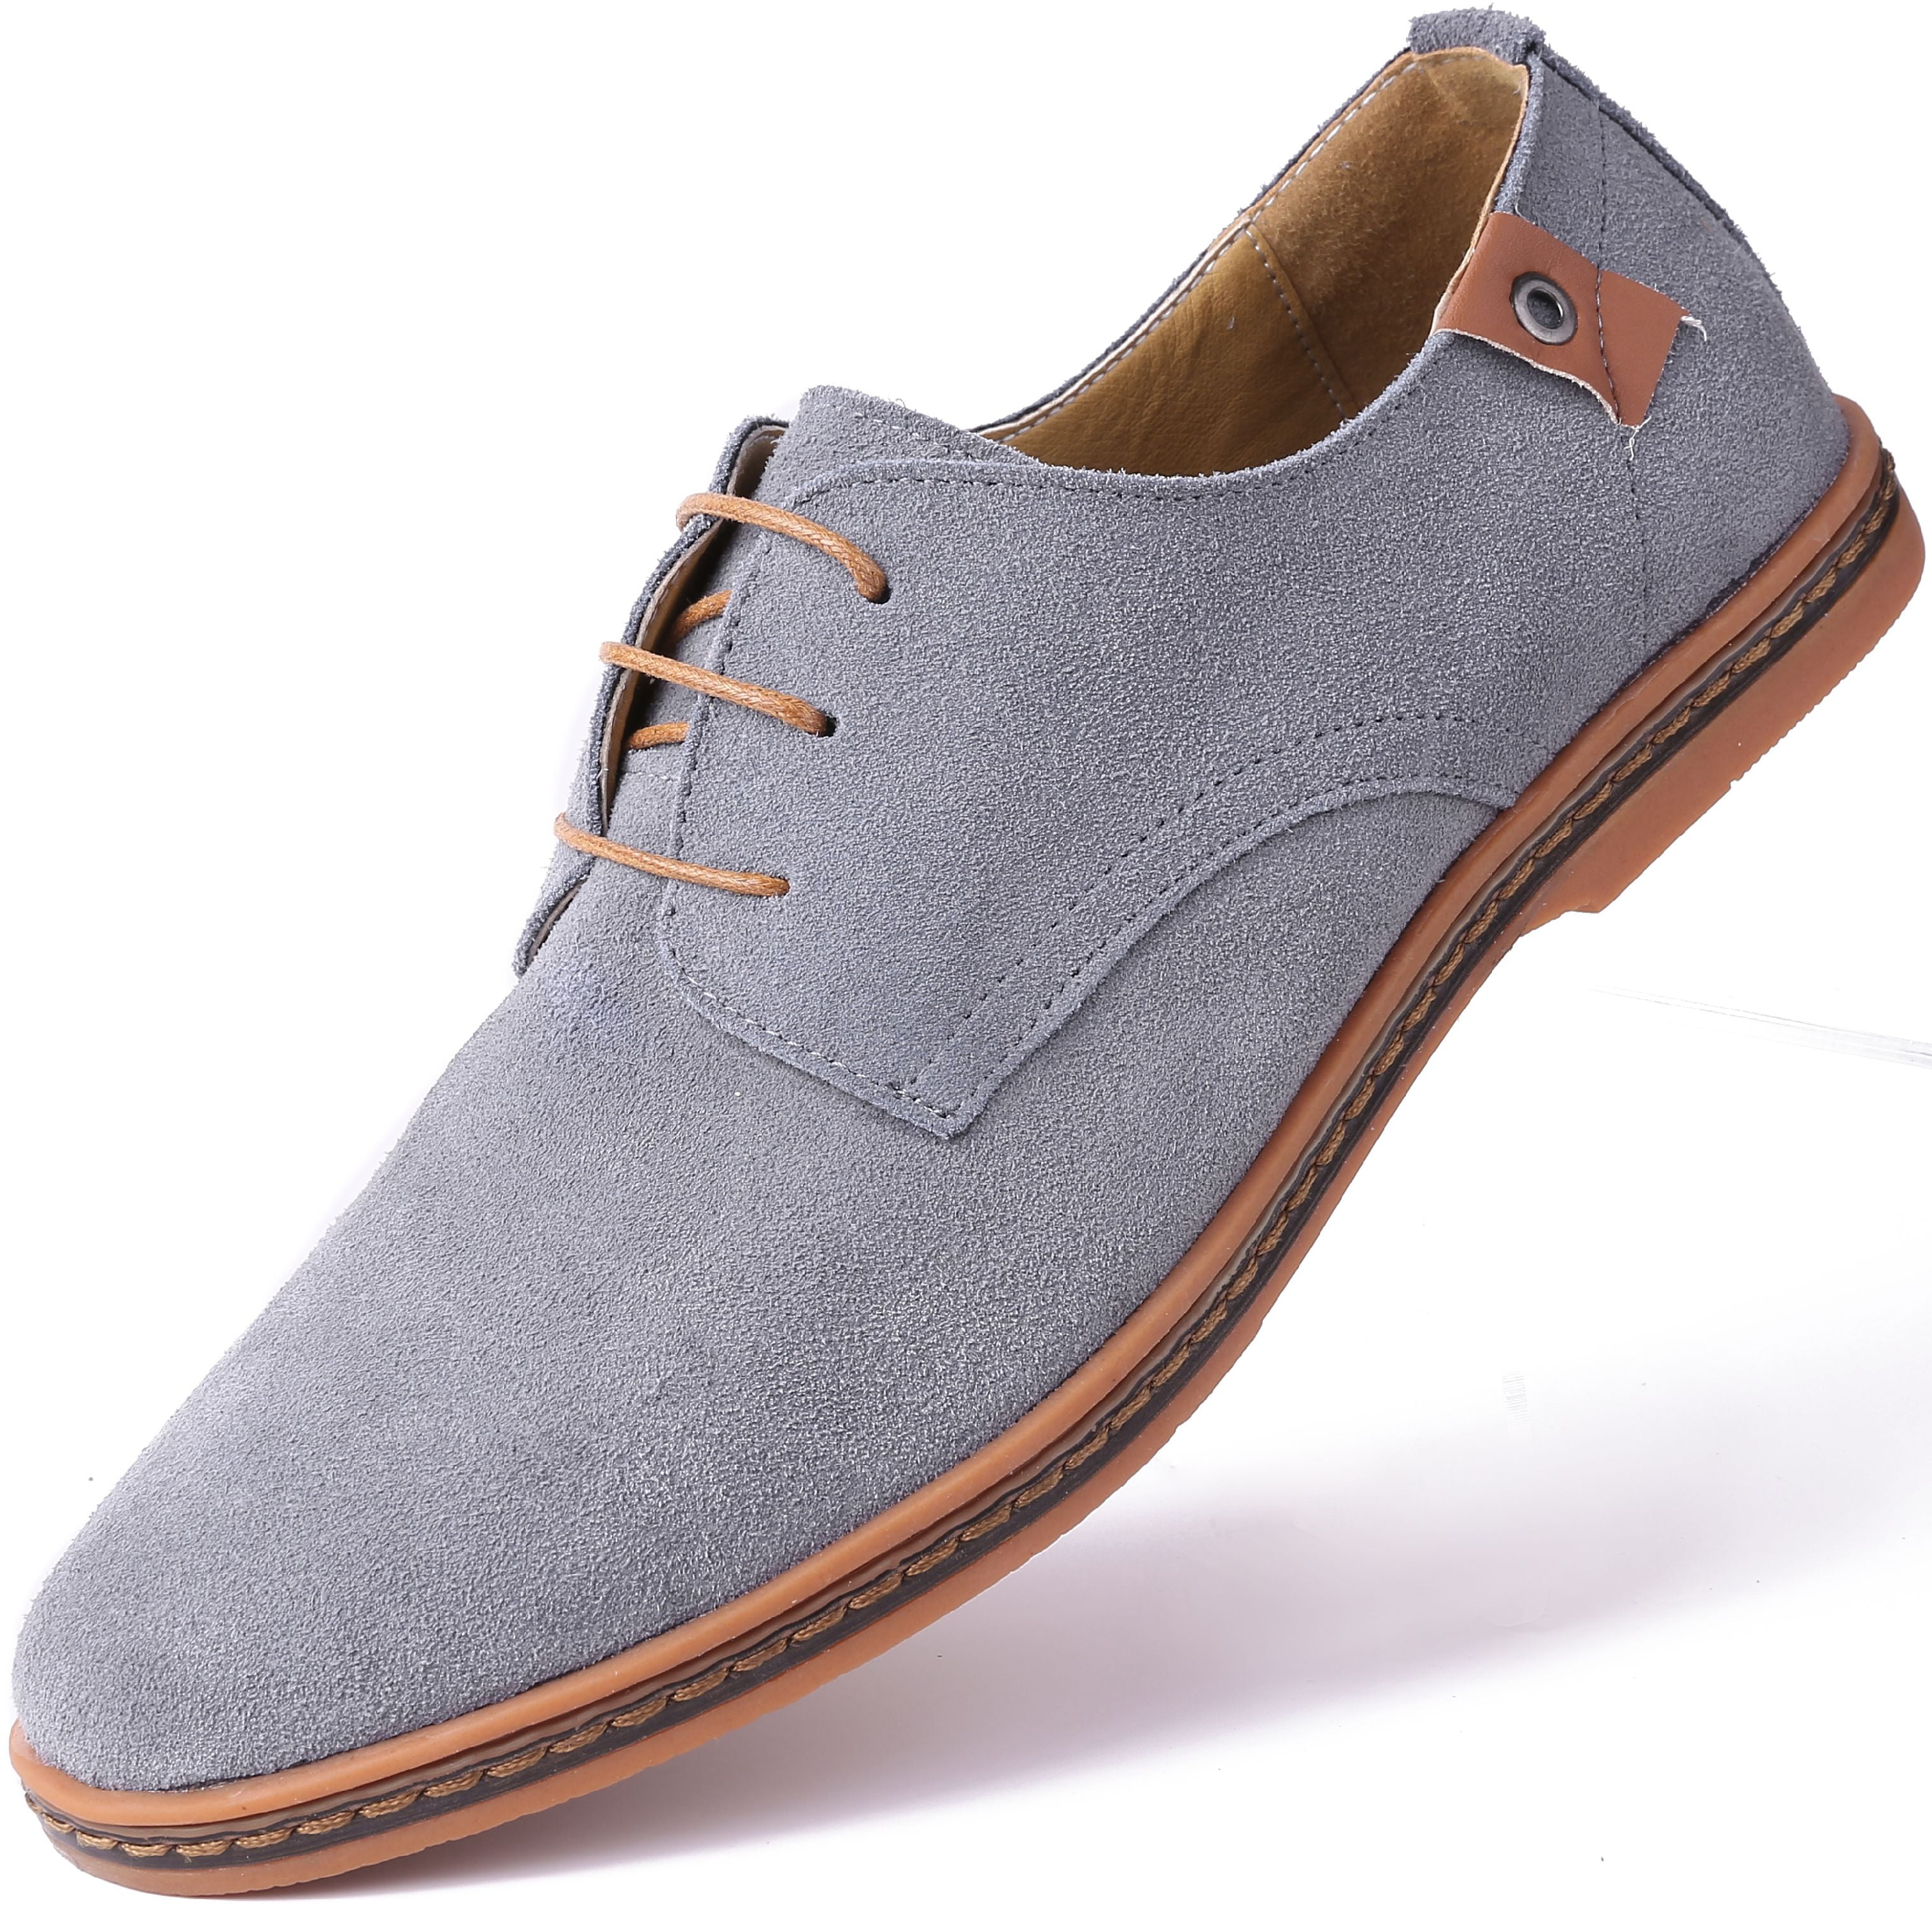 Marino Suede Oxford Dress Shoes for Men - Business Casual Shoes - Light ...